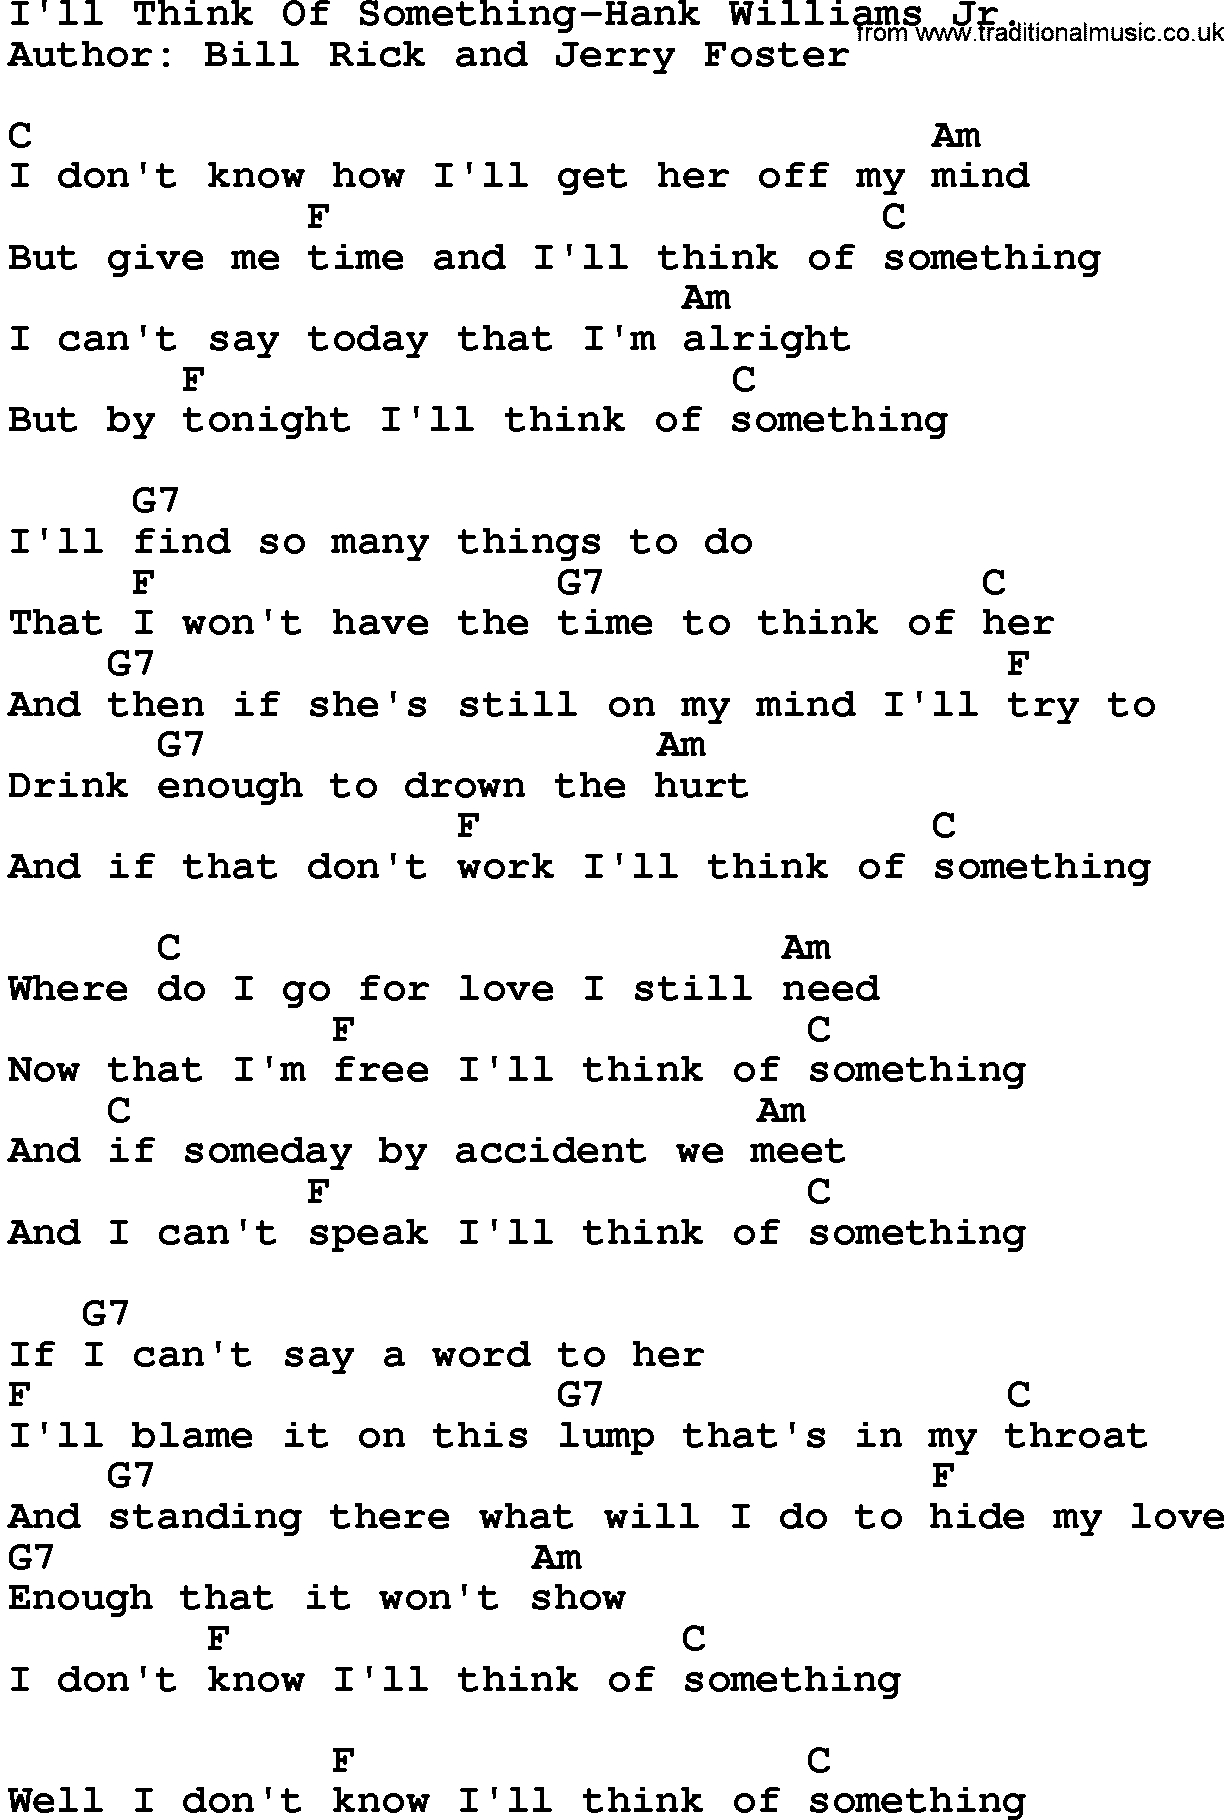 Say Something Chords Country Musicill Think Of Something Hank Williams Jr Lyrics And Chords